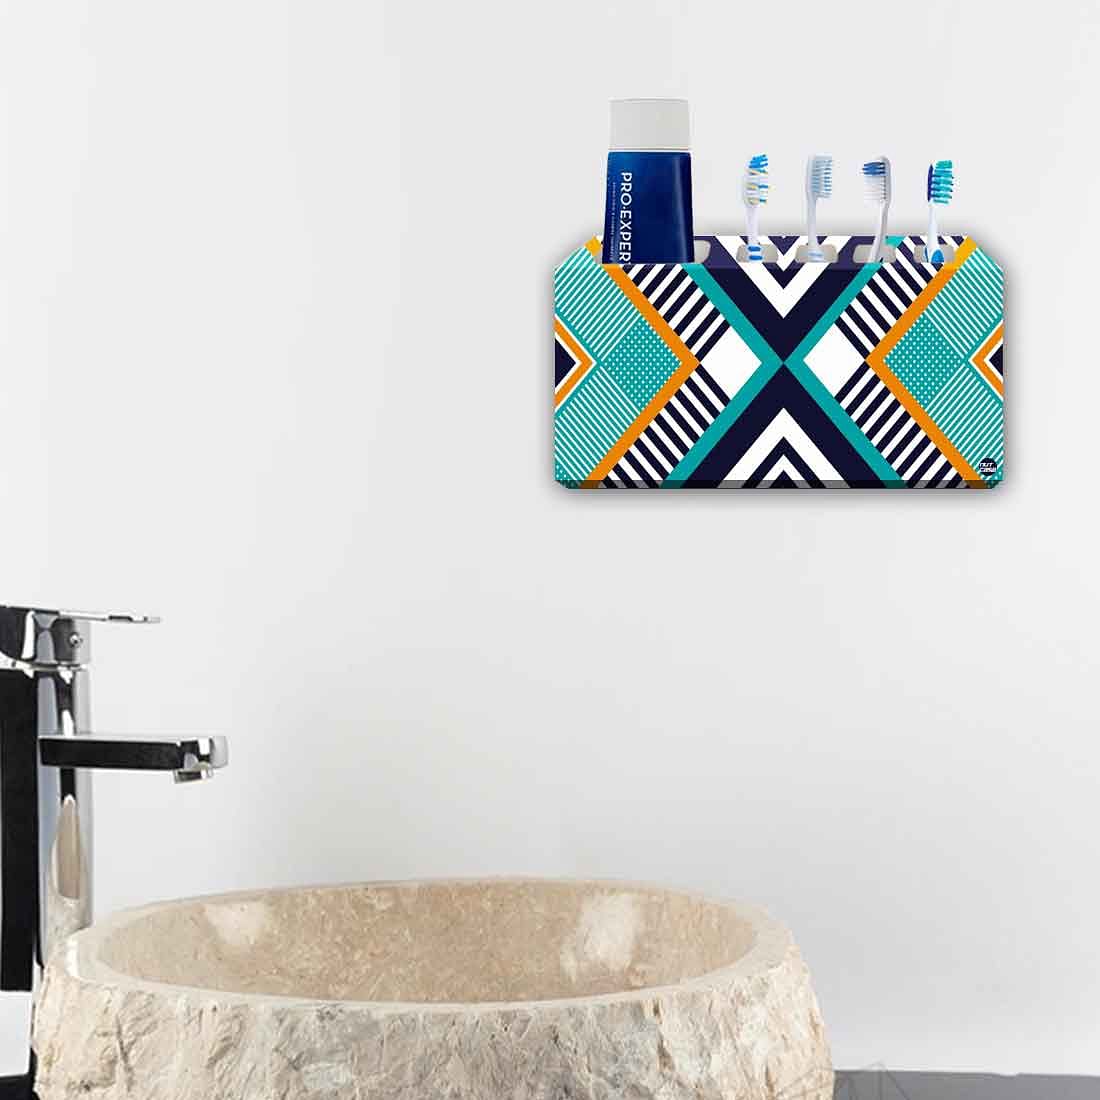 Toothbrush Holder Wall Mounted -Aztec Mix Nutcase